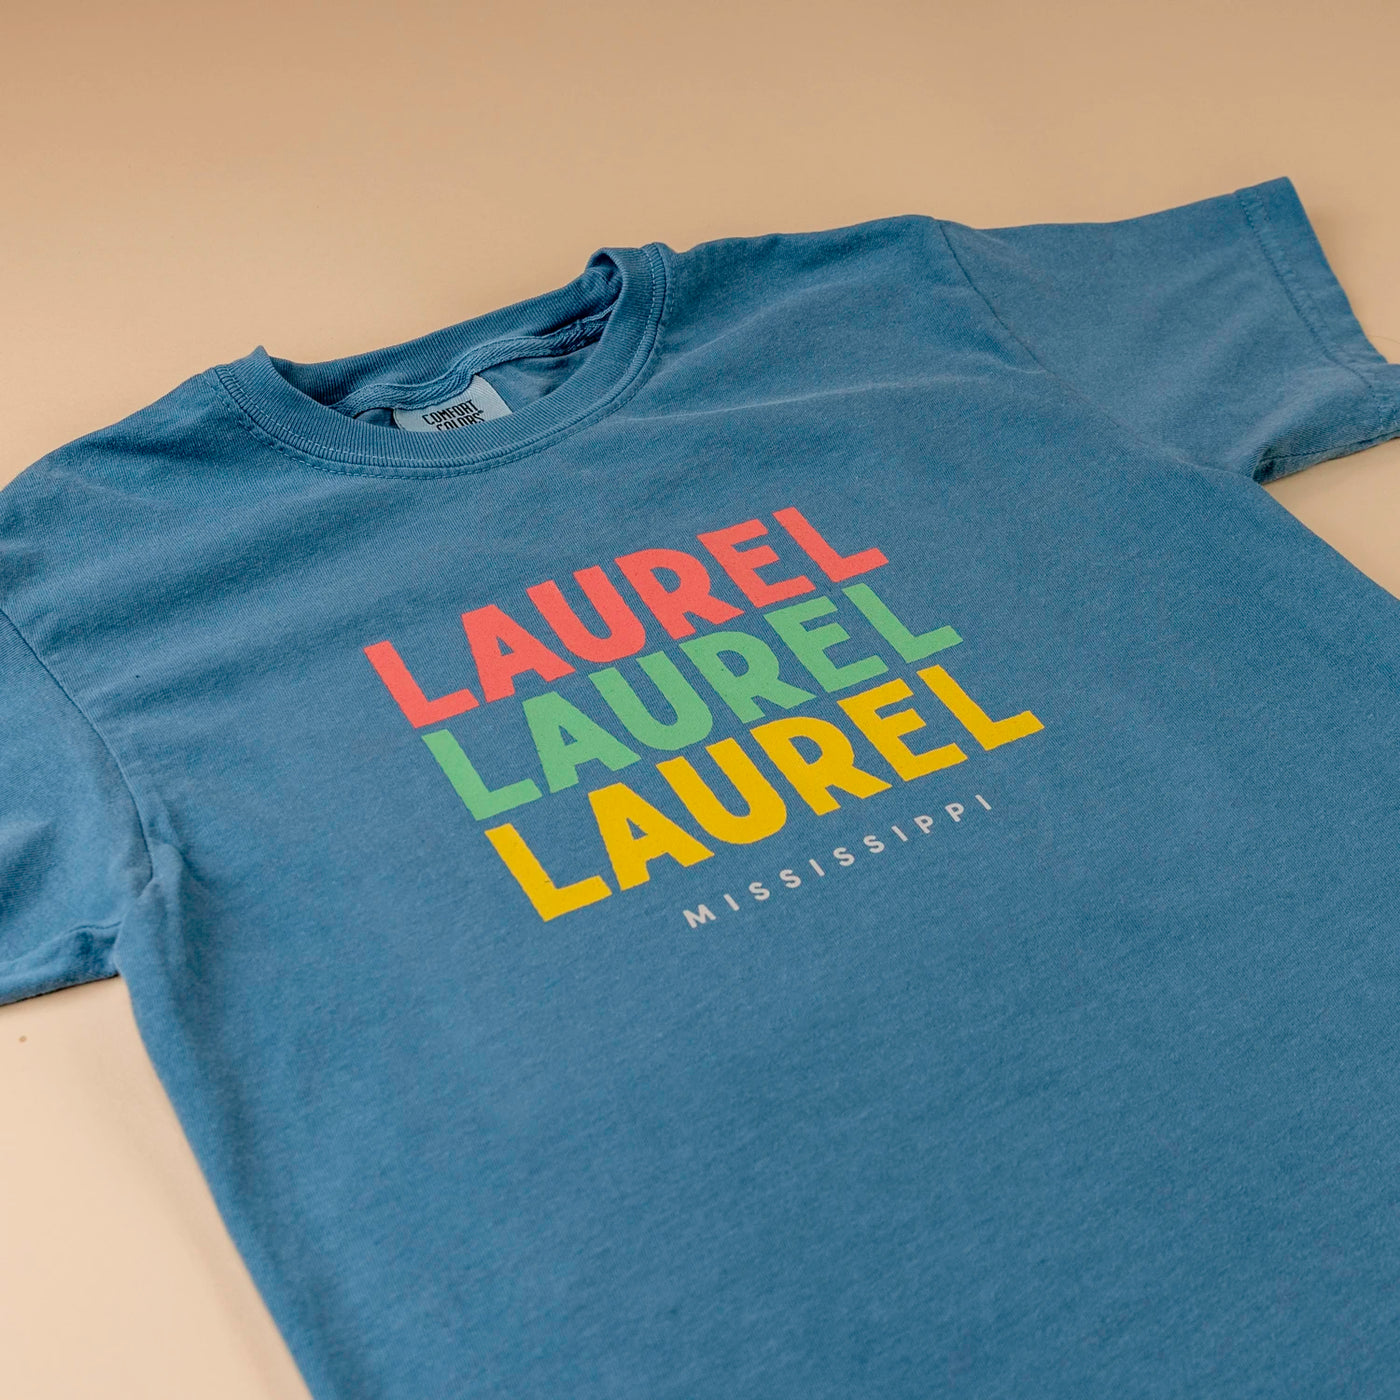 Laurel Stack Youth T-Shirt